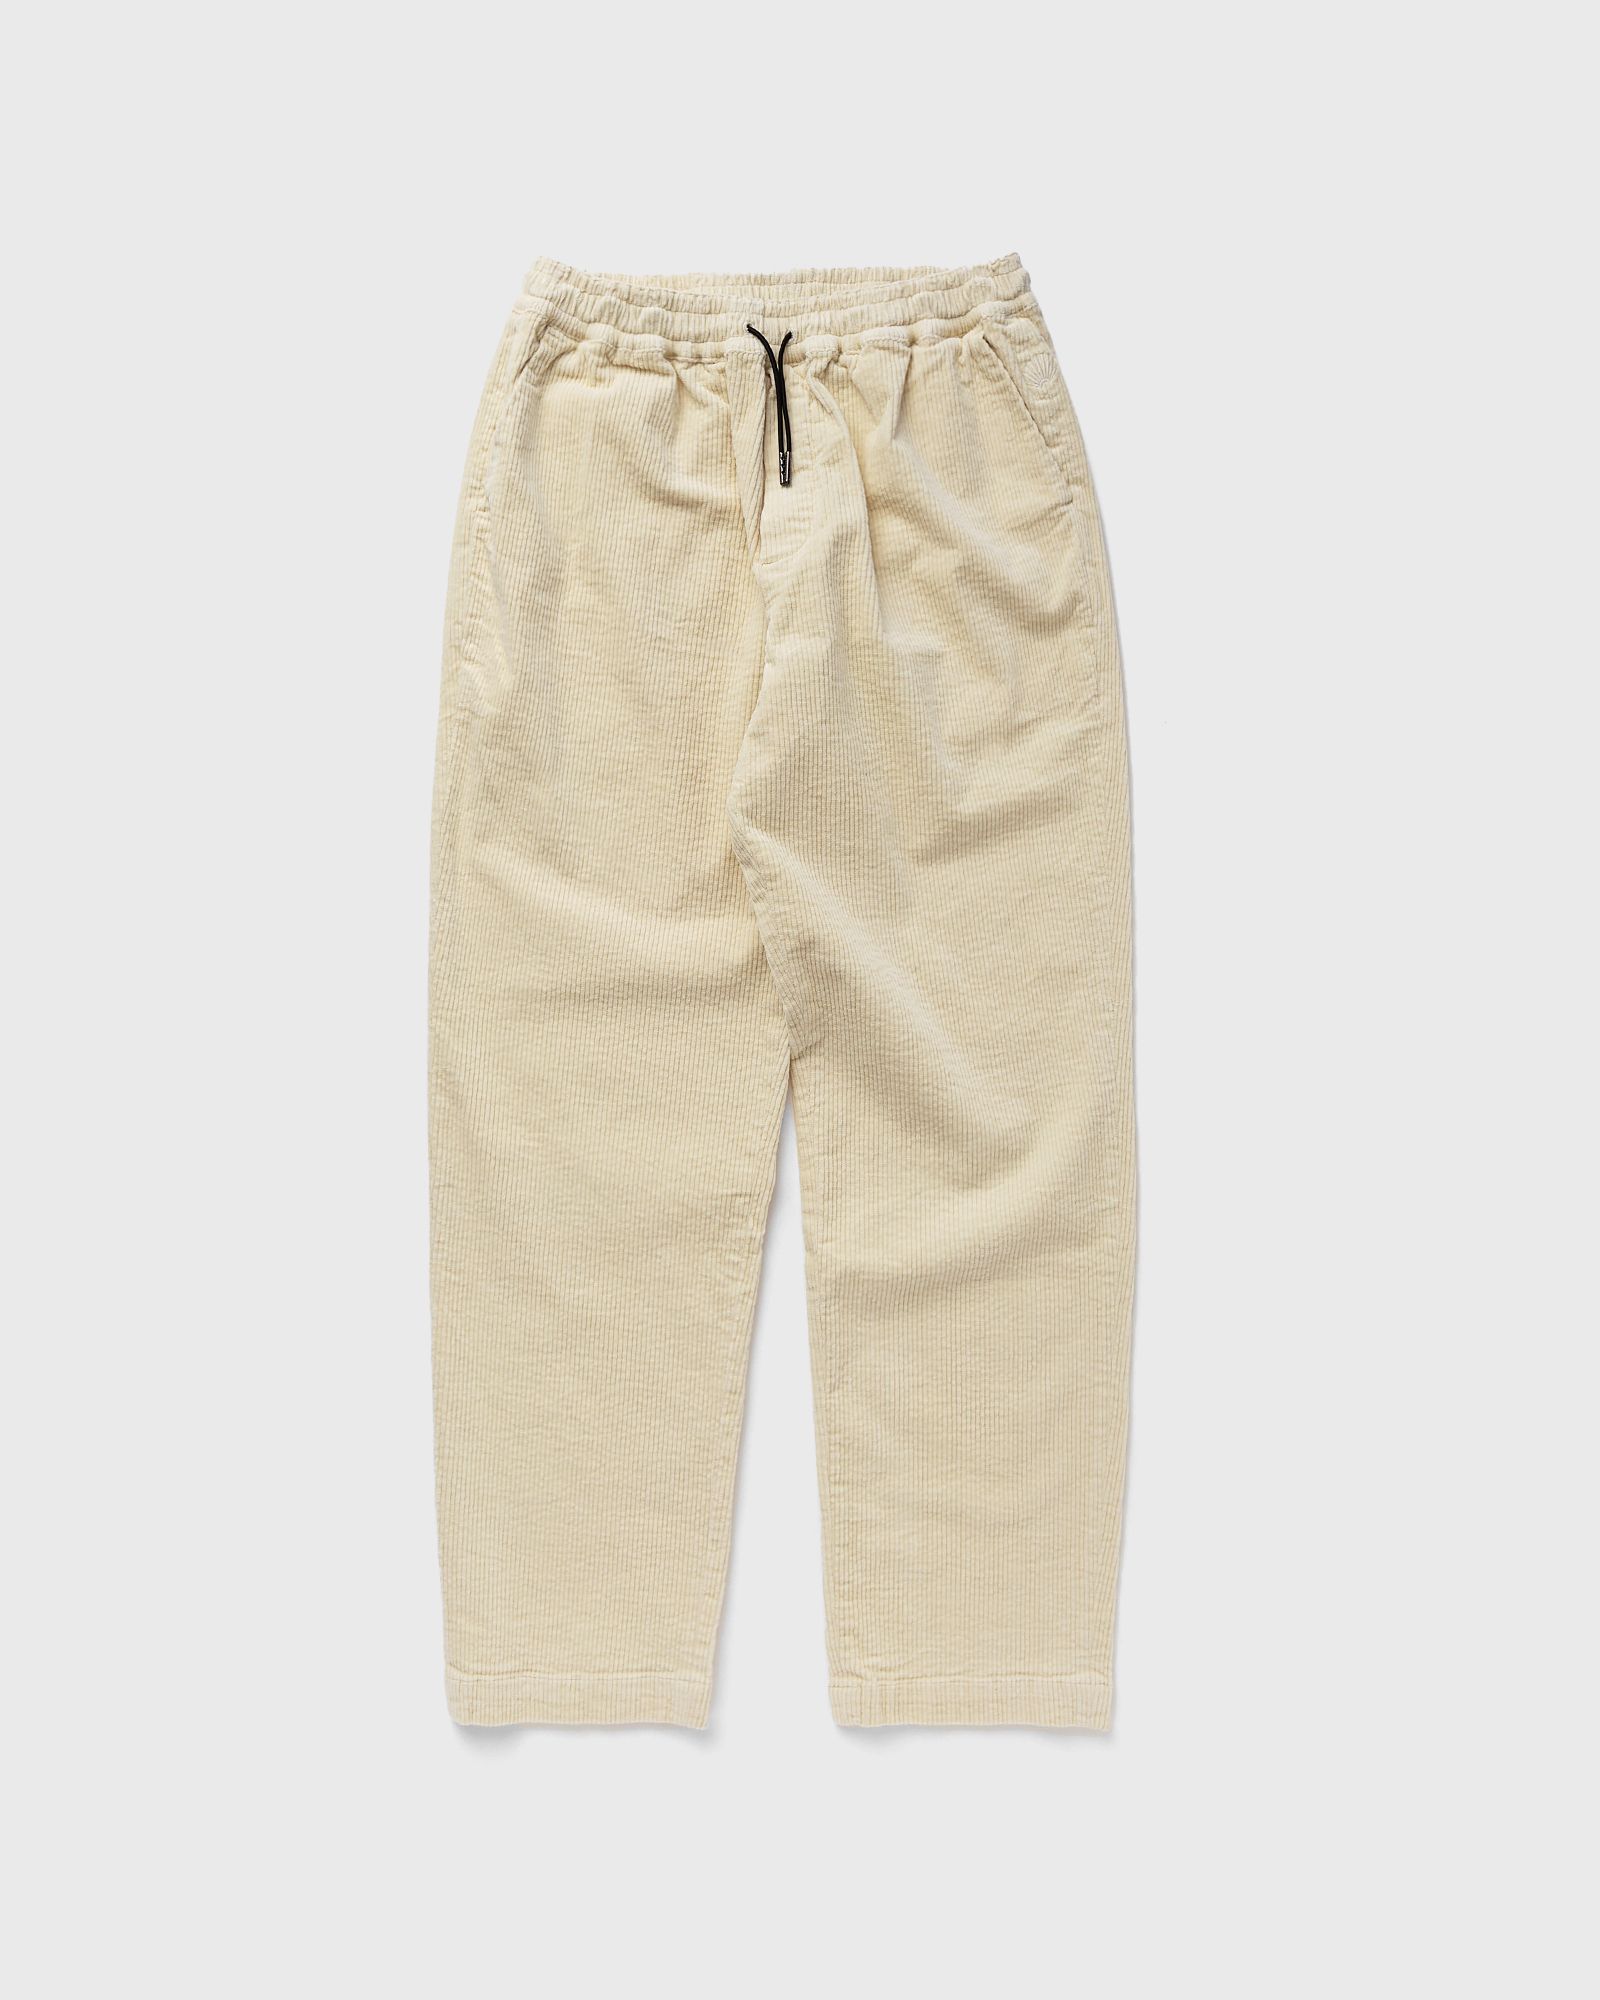 New Amsterdam - work trouser cord men casual pants white in größe:l